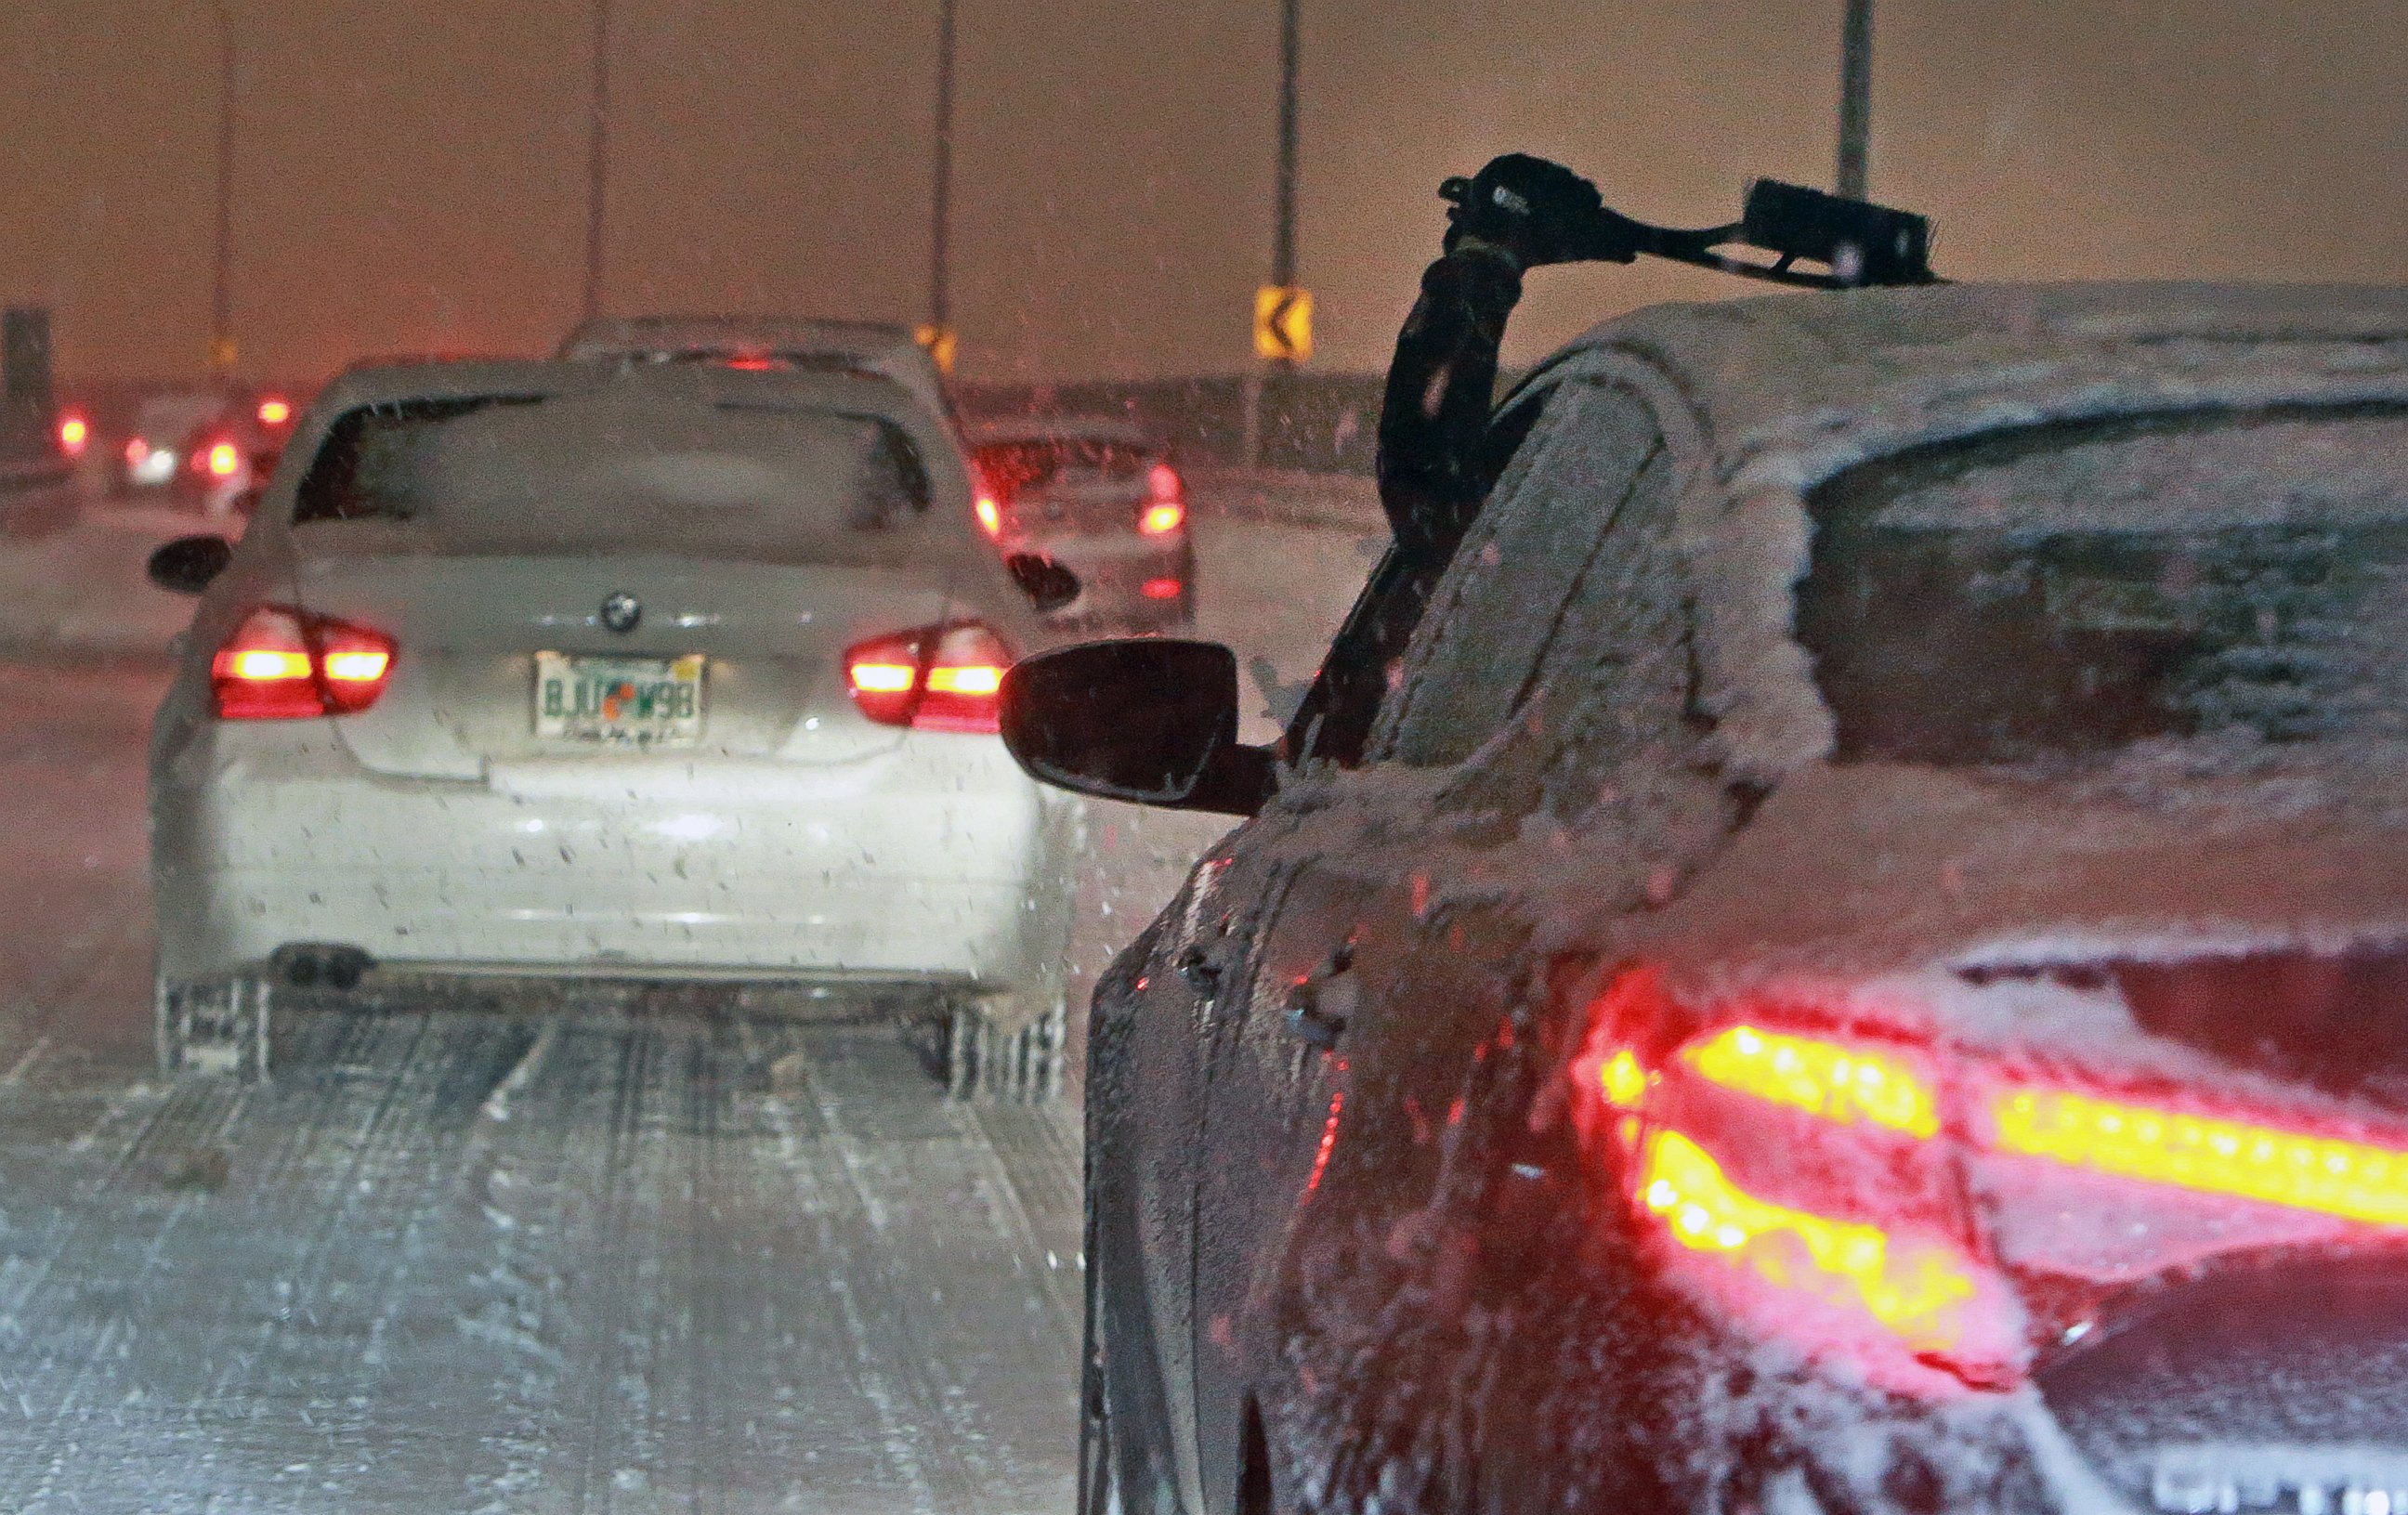 A driver reaches out to clear their windshield of snow and ice while navigating storm snarled traffic in Boston on Dec. 17, 2013.